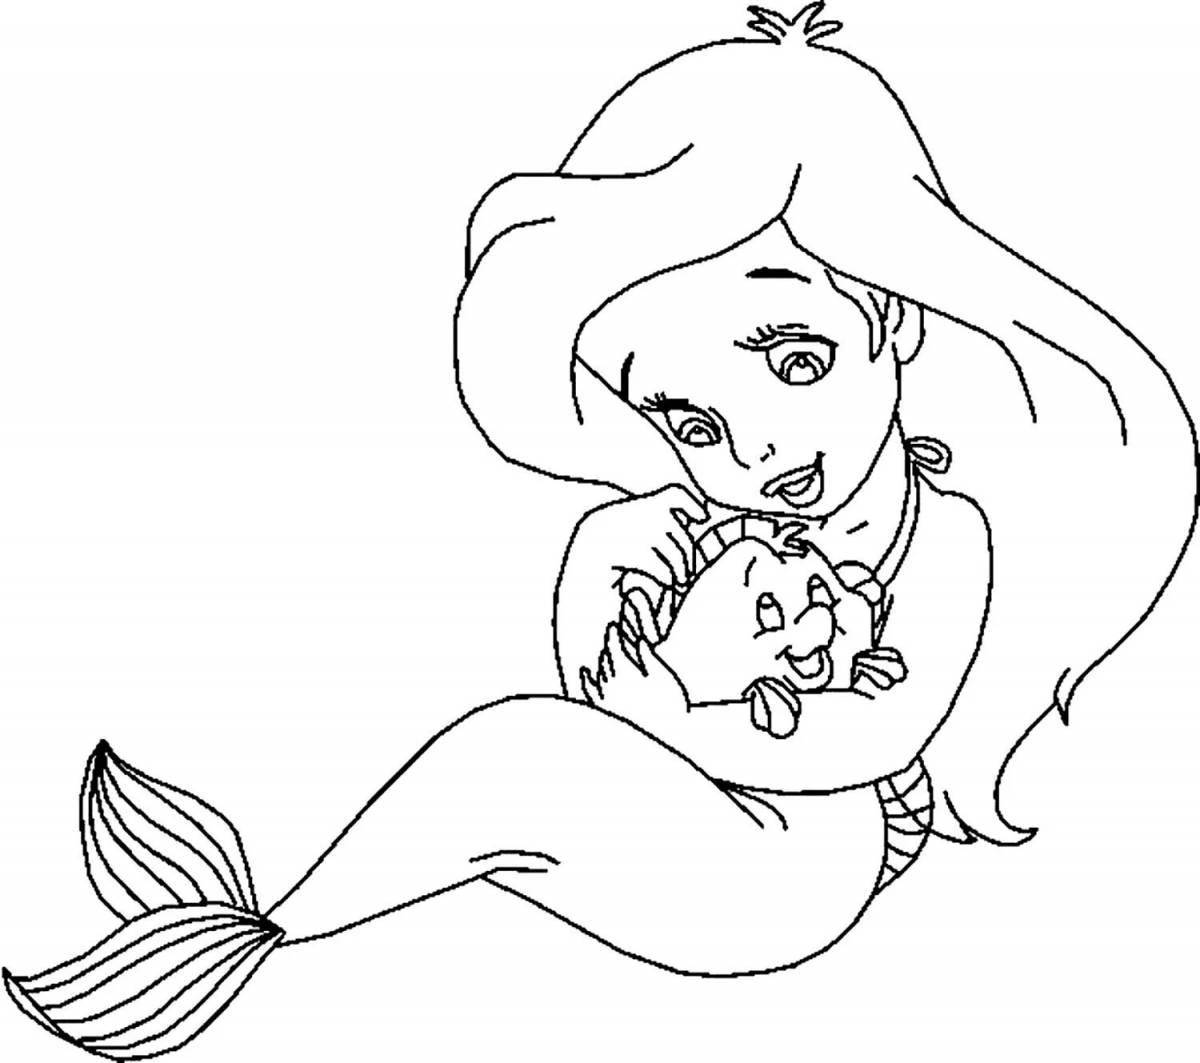 Luana's animated coloring page